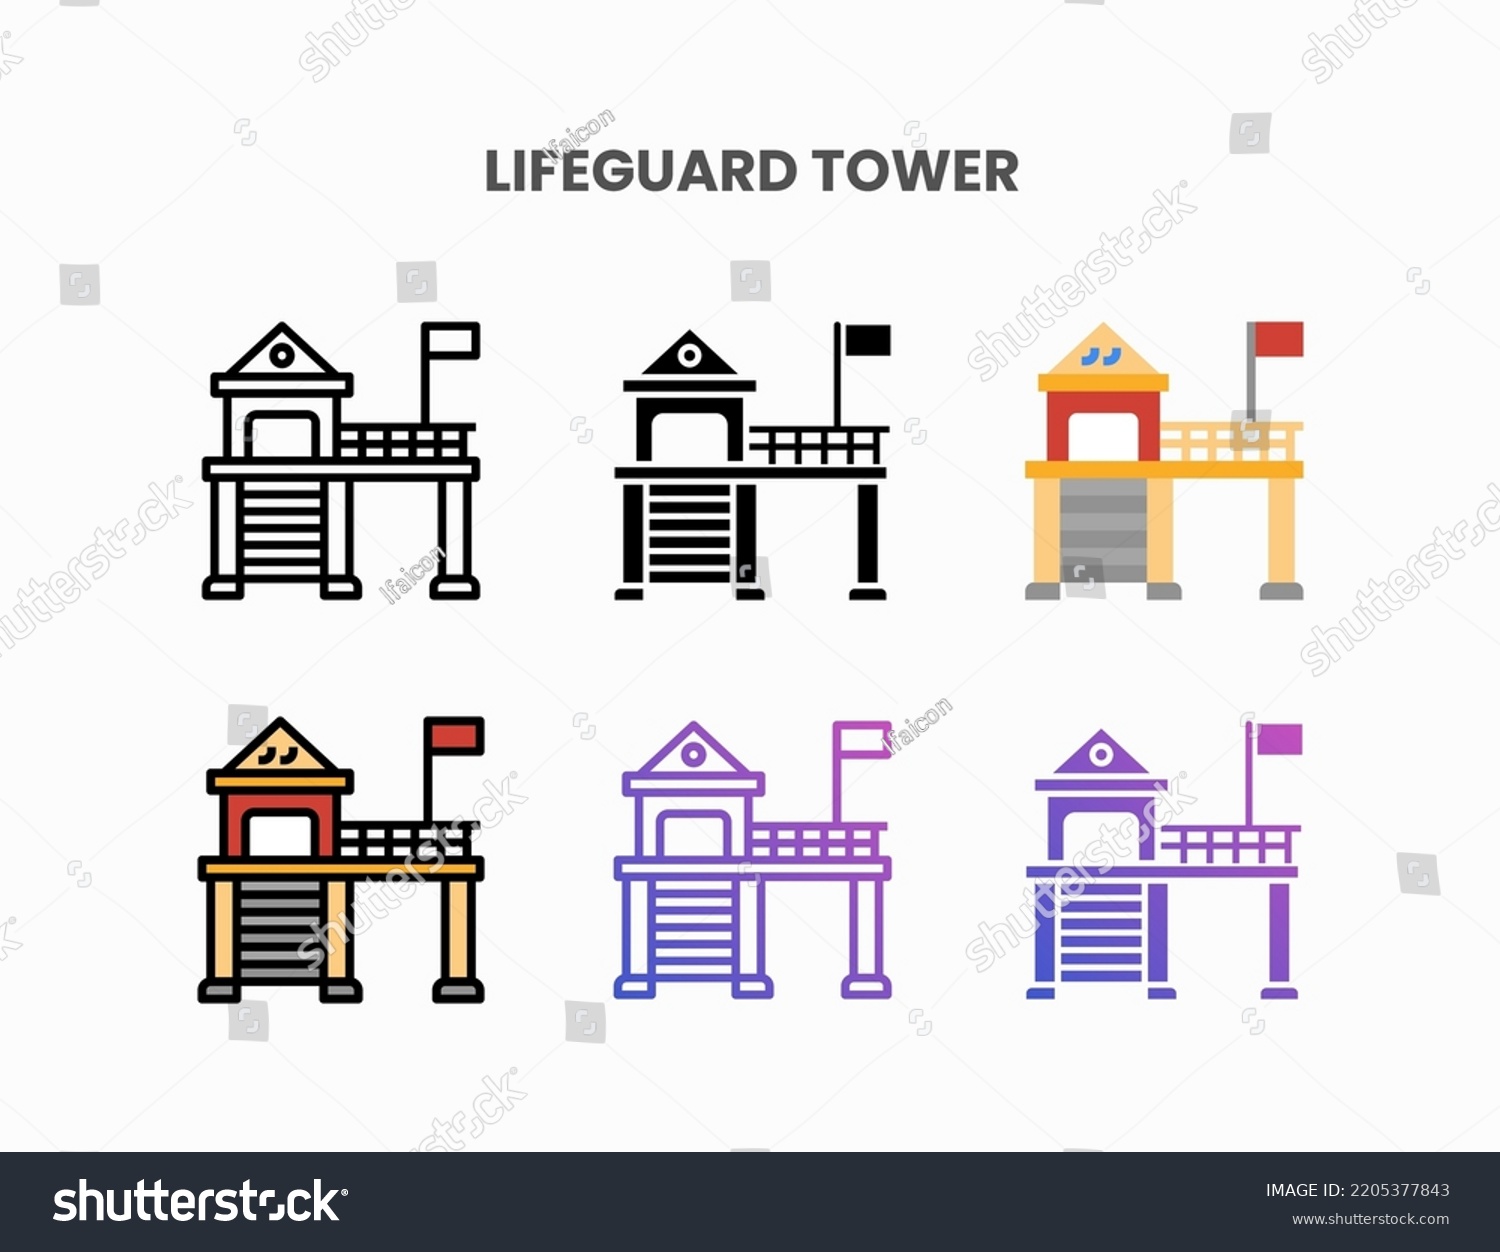 SVG of Lifeguard Tower icon set with line, outline, flat, filled, glyph, color, gradient. Can be used for digital product, presentation, print design and more. svg